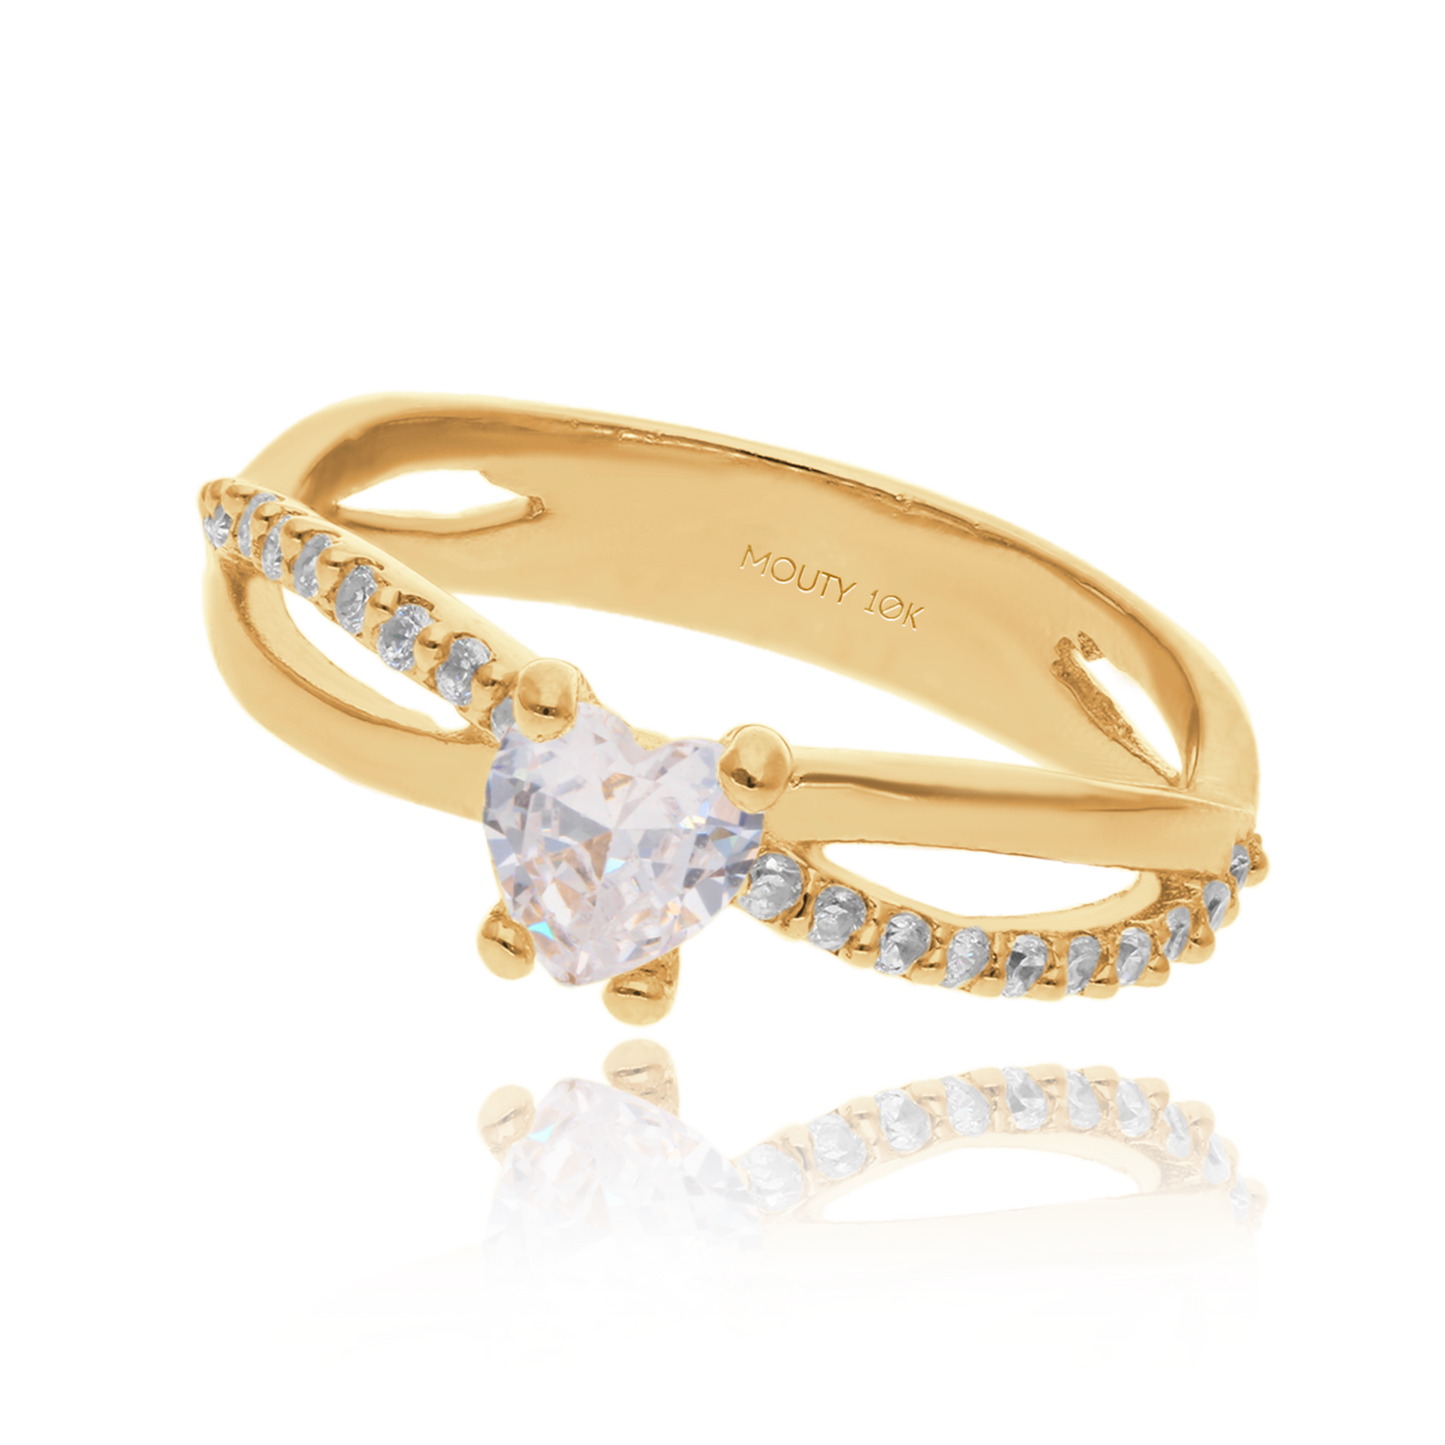 Lenn Ring in 10k Yellow Gold with Zirconia